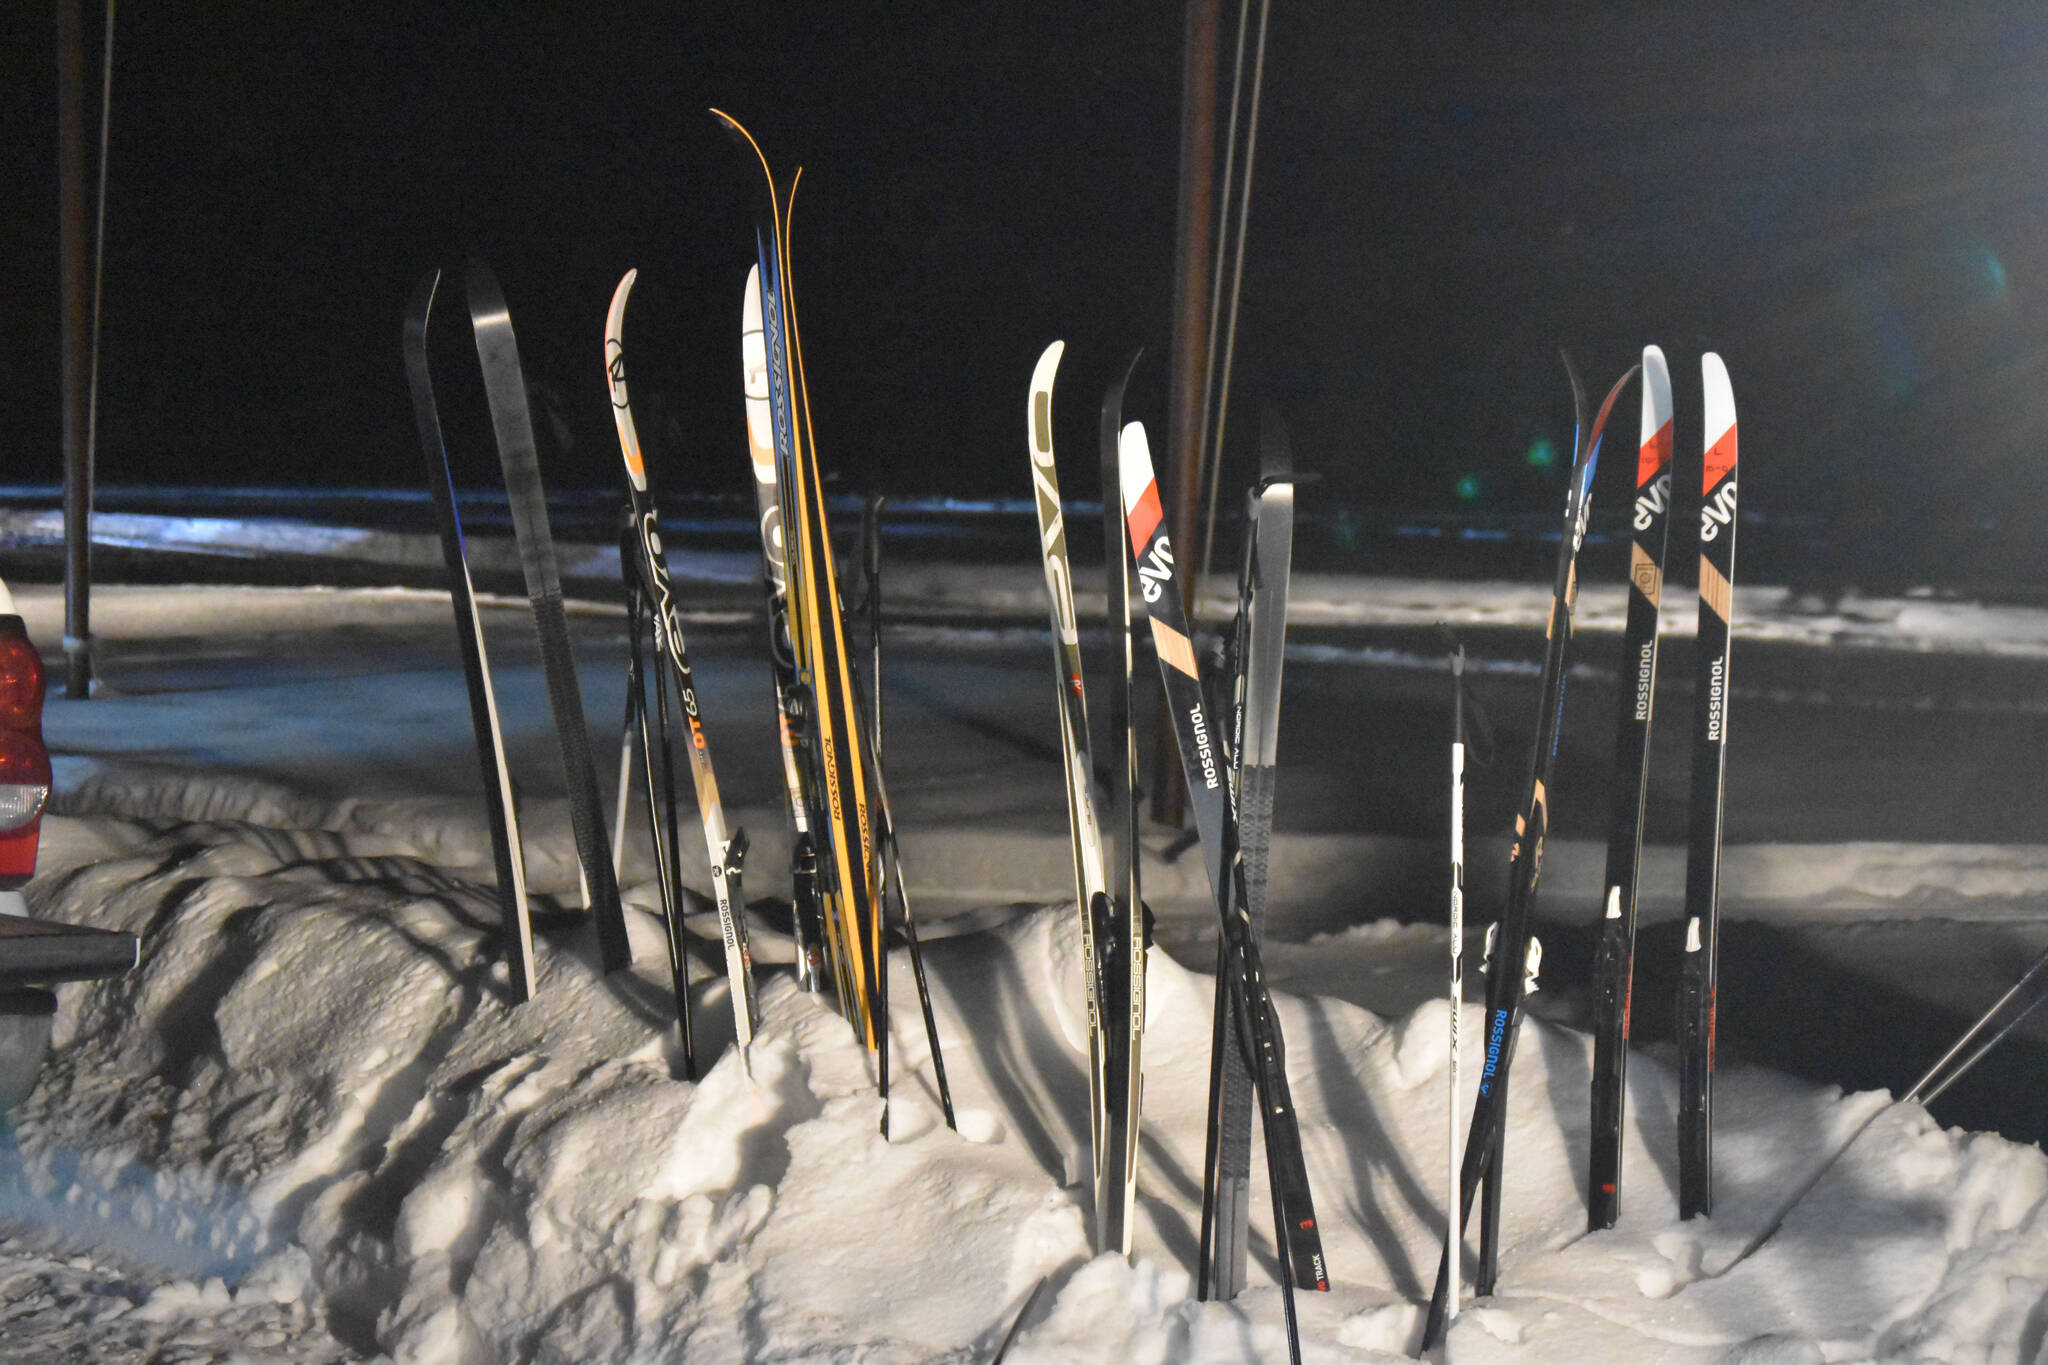 Skis poke out of the snow minutes before the start of StarLight StarBright: A Winter Solstice Ski Event on Wednesday, Dec. 21, 2022 at the Kenai Golf Course in Kenai, Alaska.